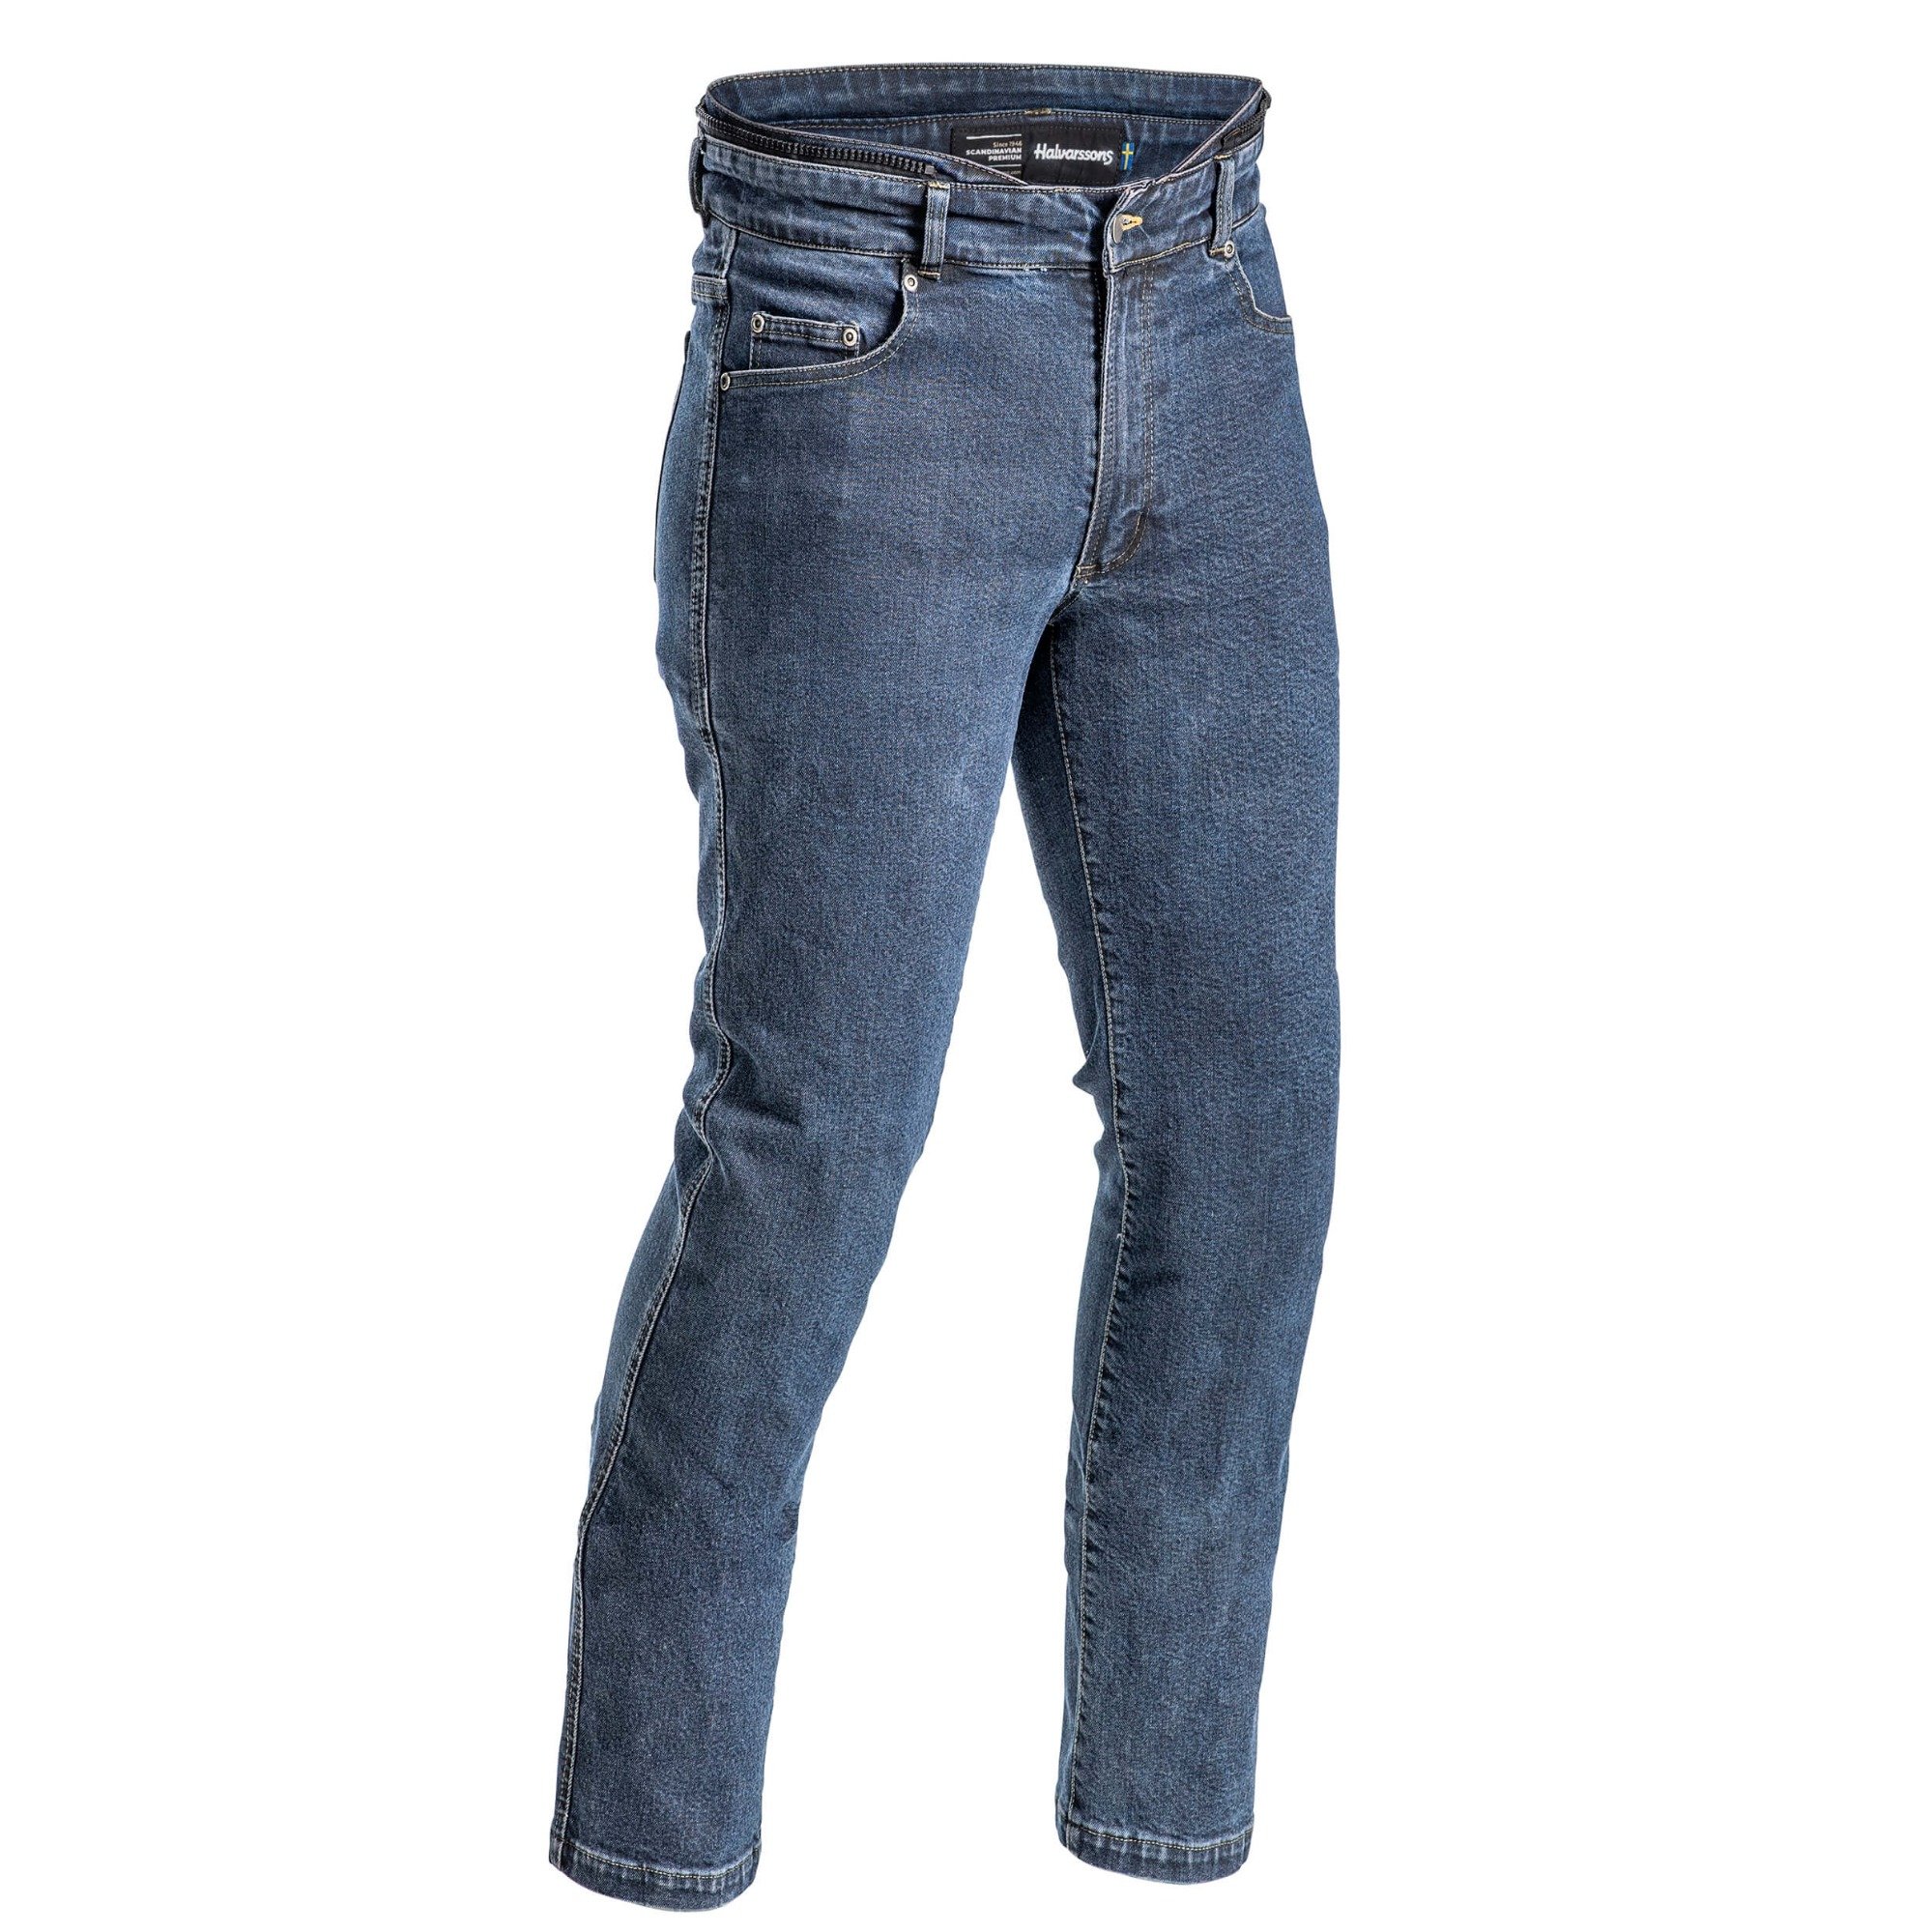 Image of Halvarssons Jeans Rogen Blue Size 48 ID 6438235238952